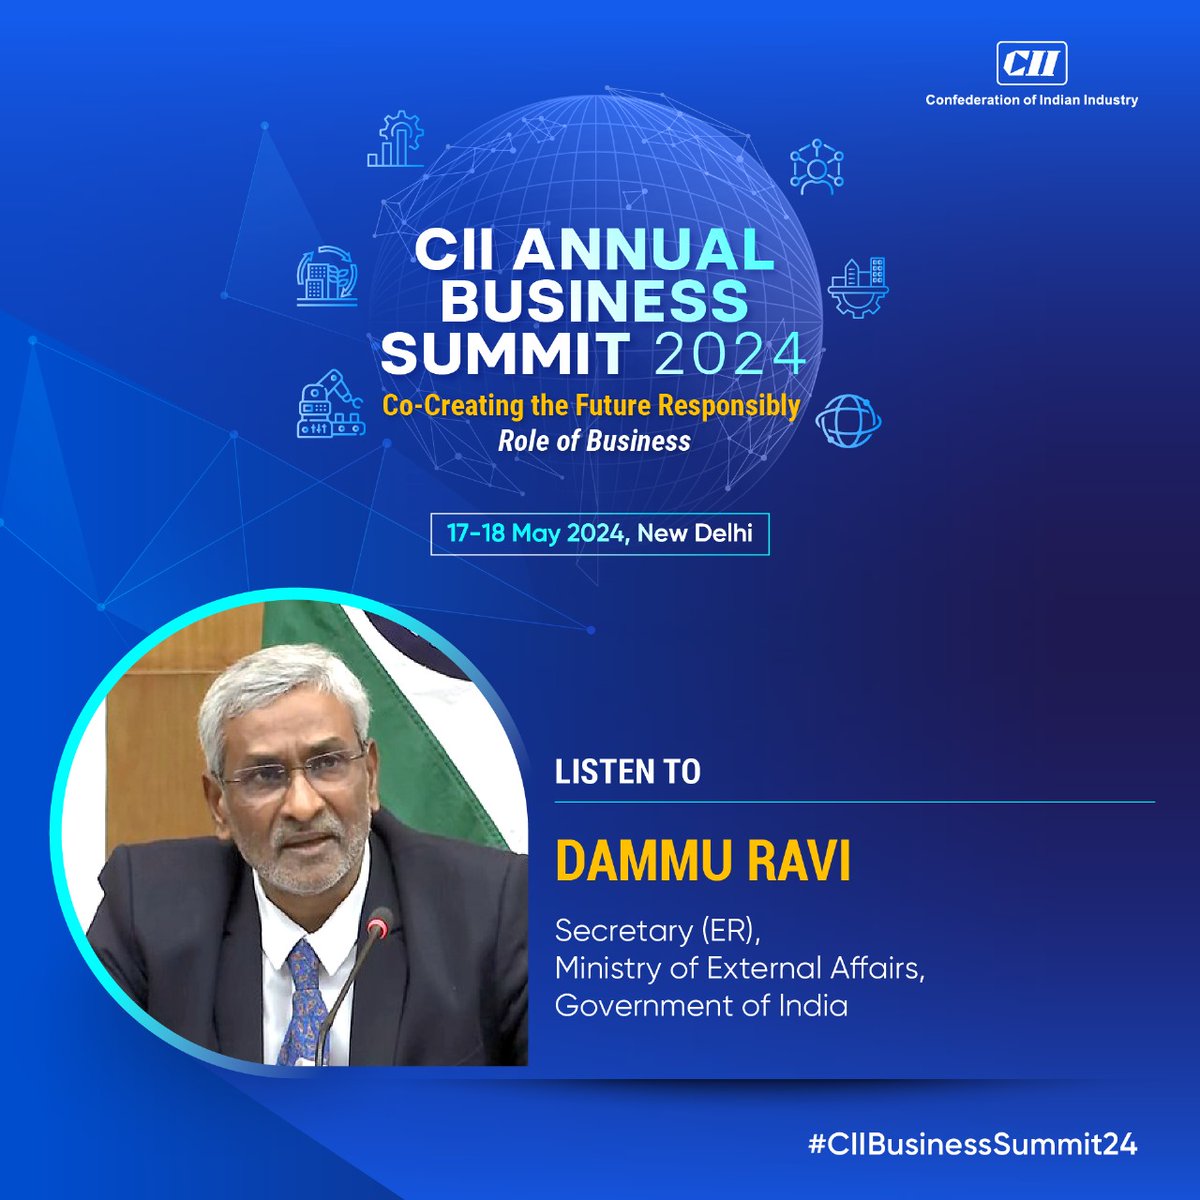 Dammu Ravi, Secretary (ER), @MEAIndia, Government of India shares valuable views at the CII Annual Business Summit 2024! Join for deep insights on India's growth trajectory and the way forward as it marches ahead on the path towards development & economic prosperity. Block your